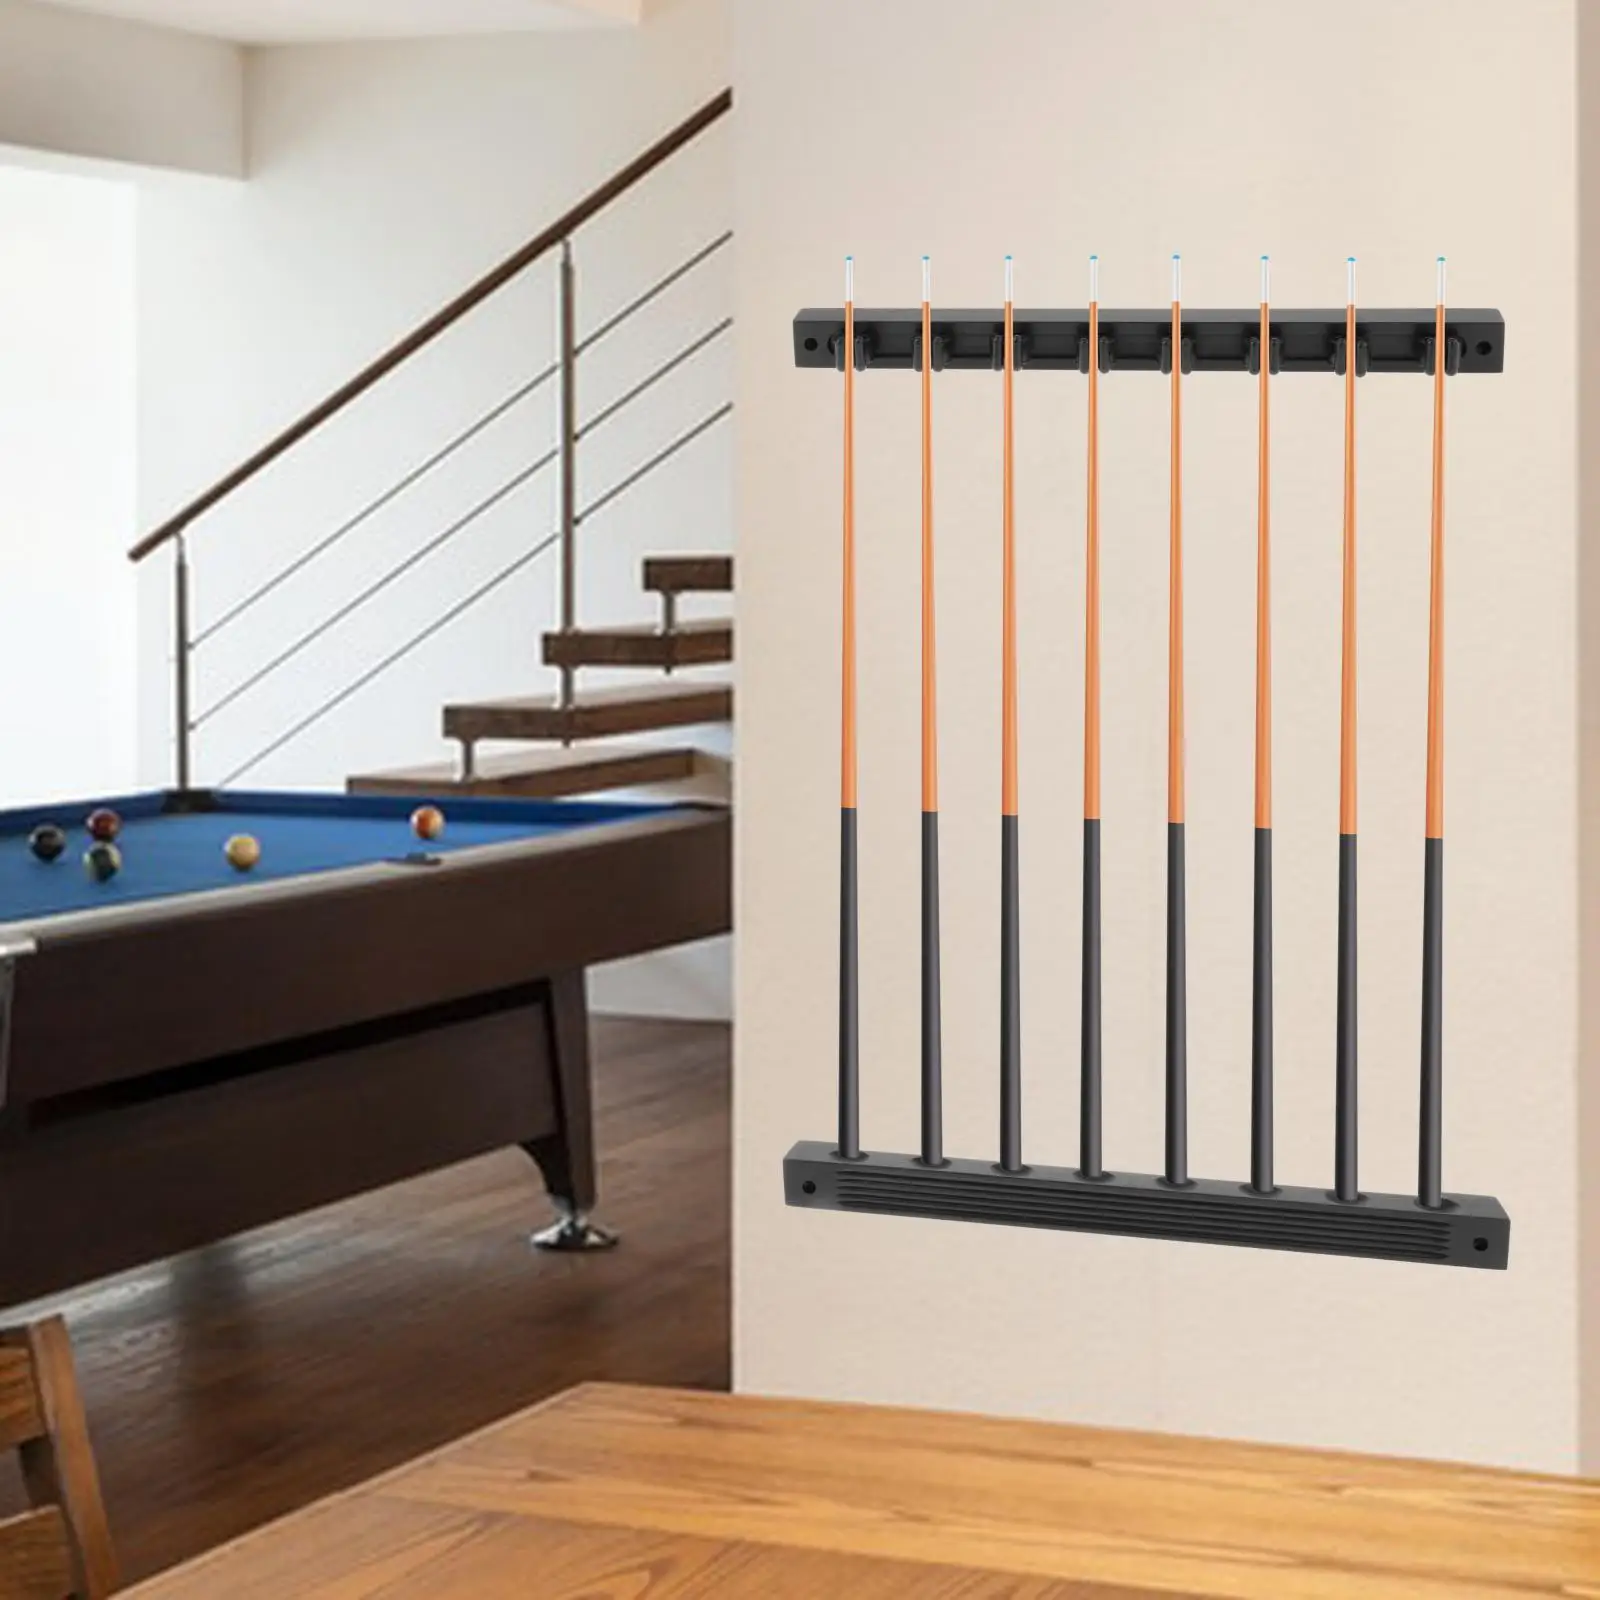 Wooden Pool Cue Holder Billiard Cue Wall Racks with 8 Cue Clips Easily Install Exquisite Sturdy Accessory Black for Game Room